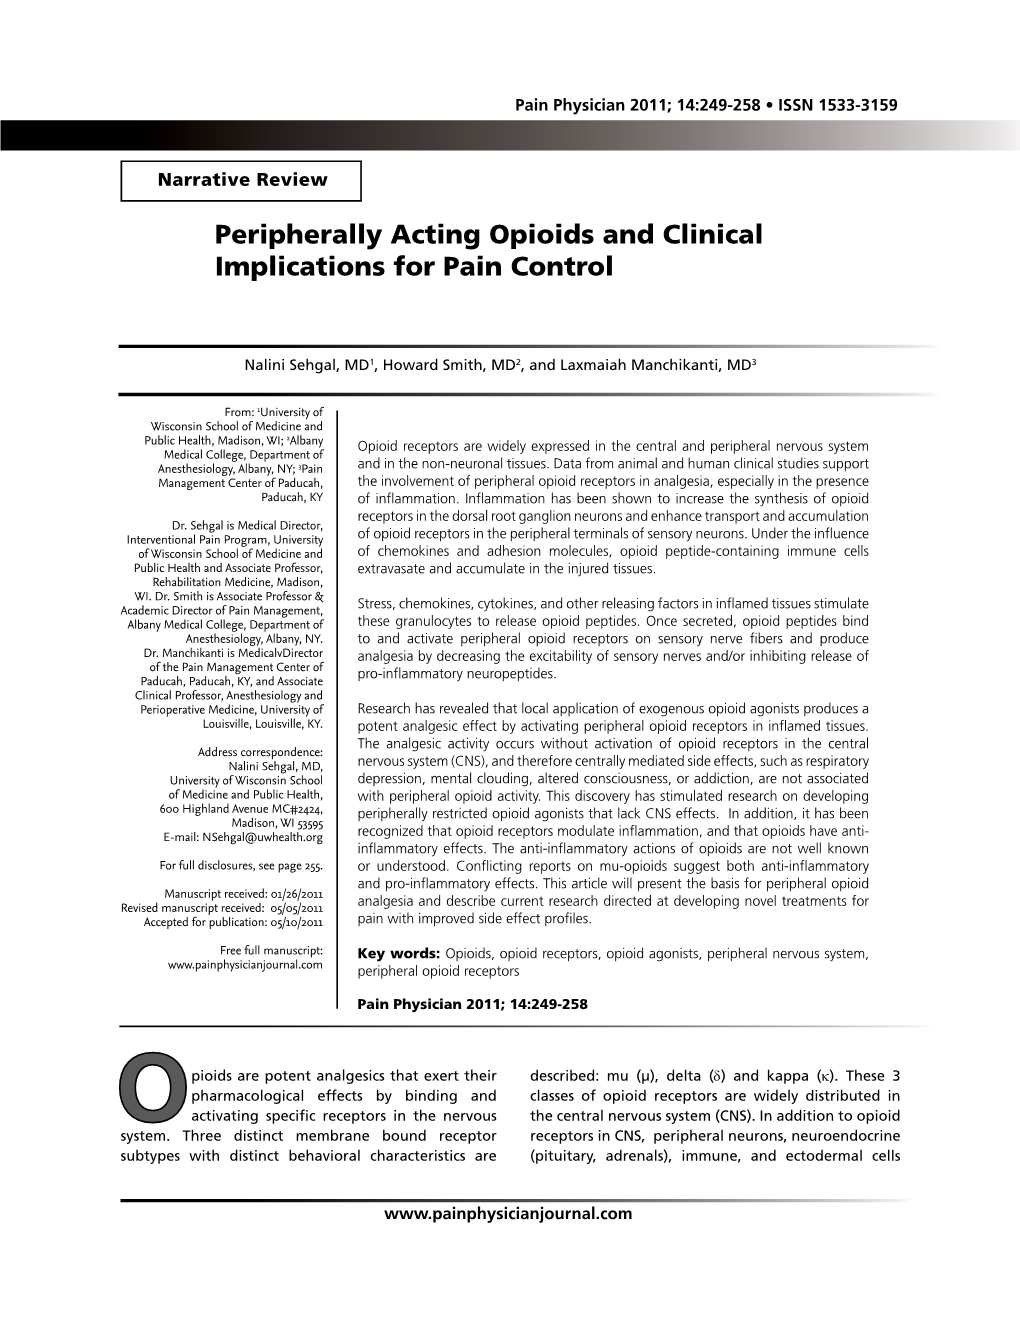 Peripherally Acting Opioids and Clinical Implications for Pain Control